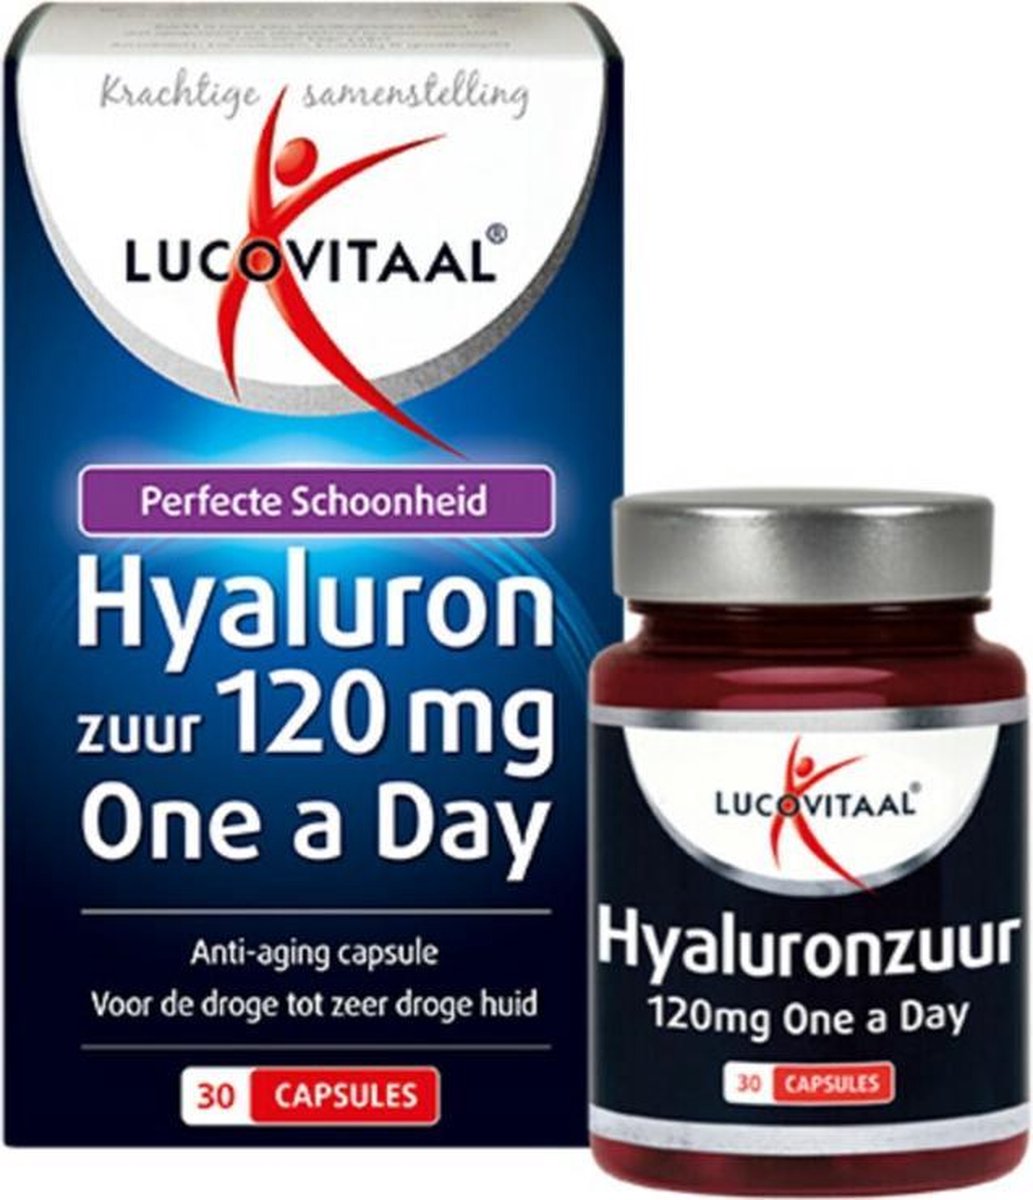 bol.com | Lucovitaal Hyaluronzuur 120 mg One a Day Voedingssupplement - 30  capsules